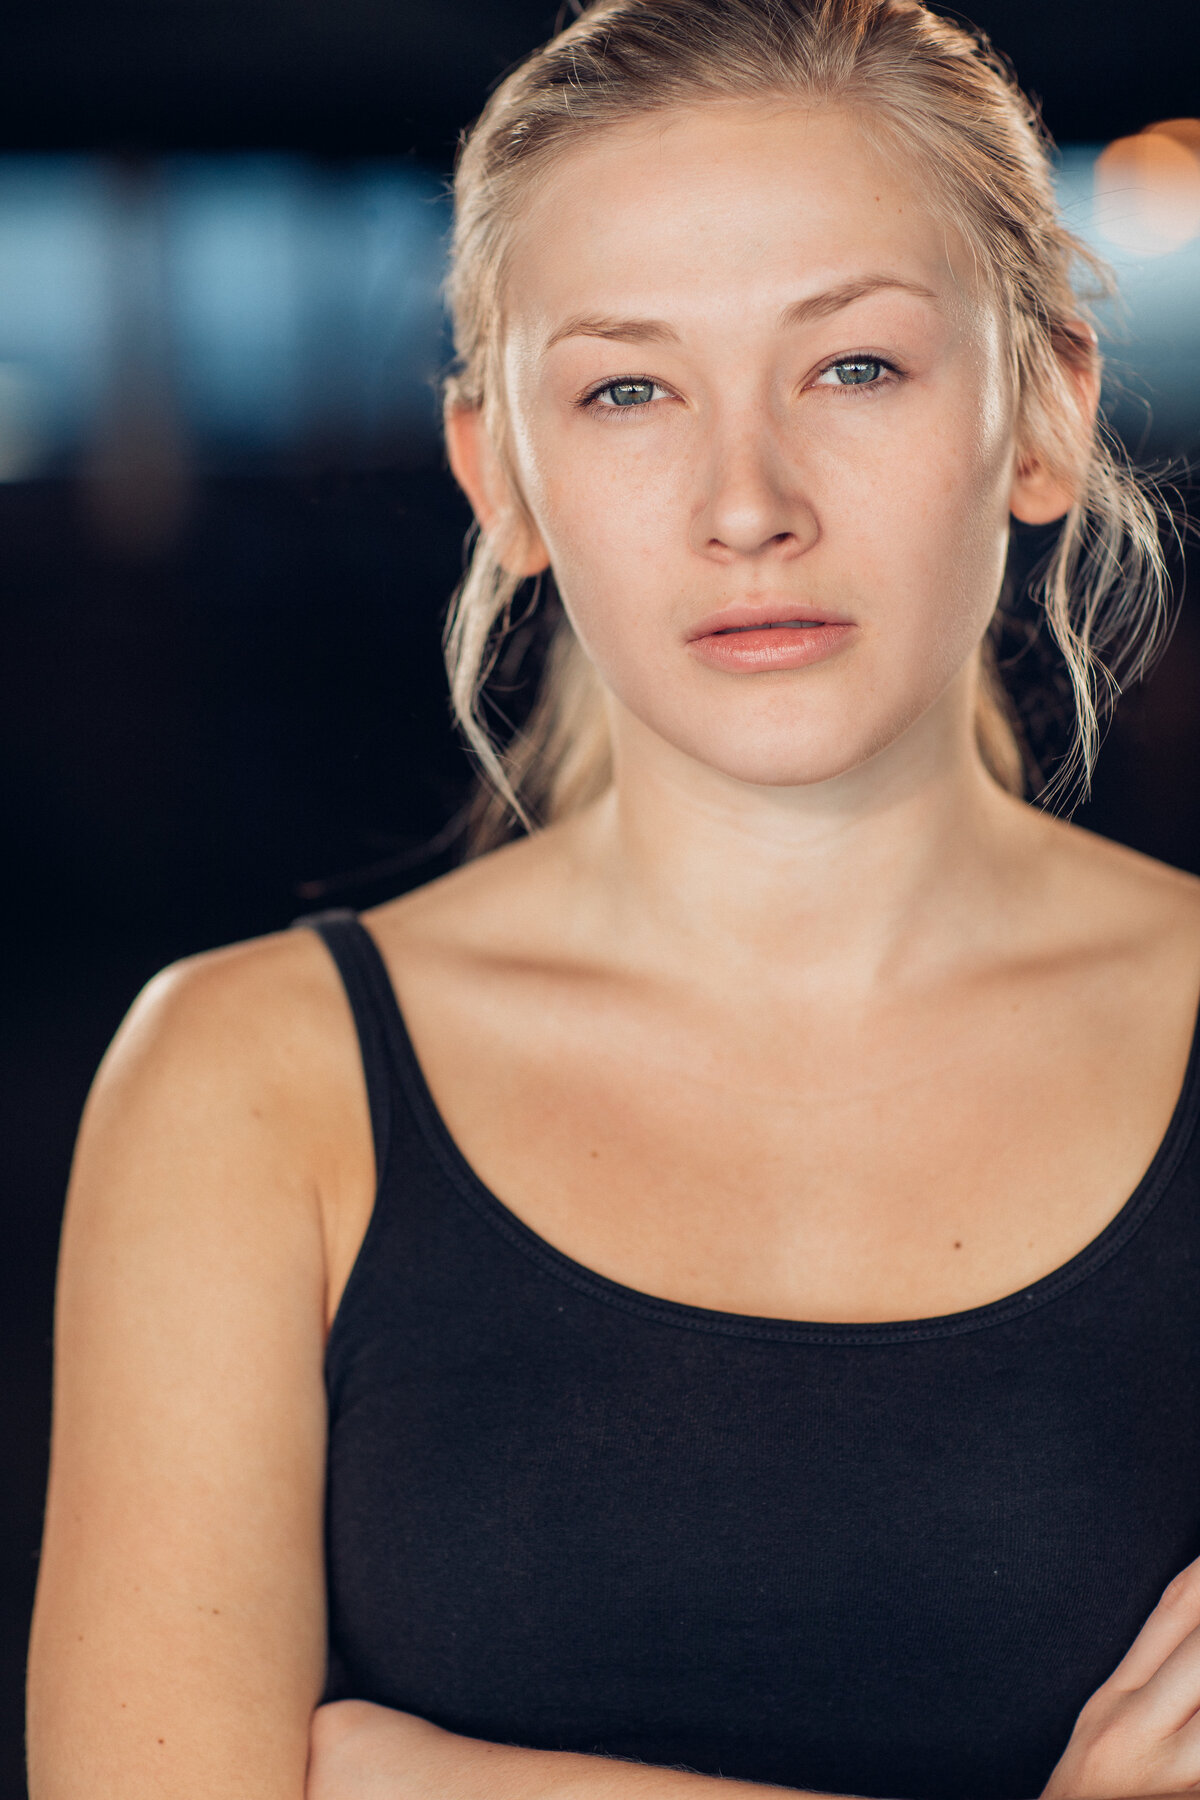 Headshot Photograph Of Young Woman In Black Tank Top Los Angeles